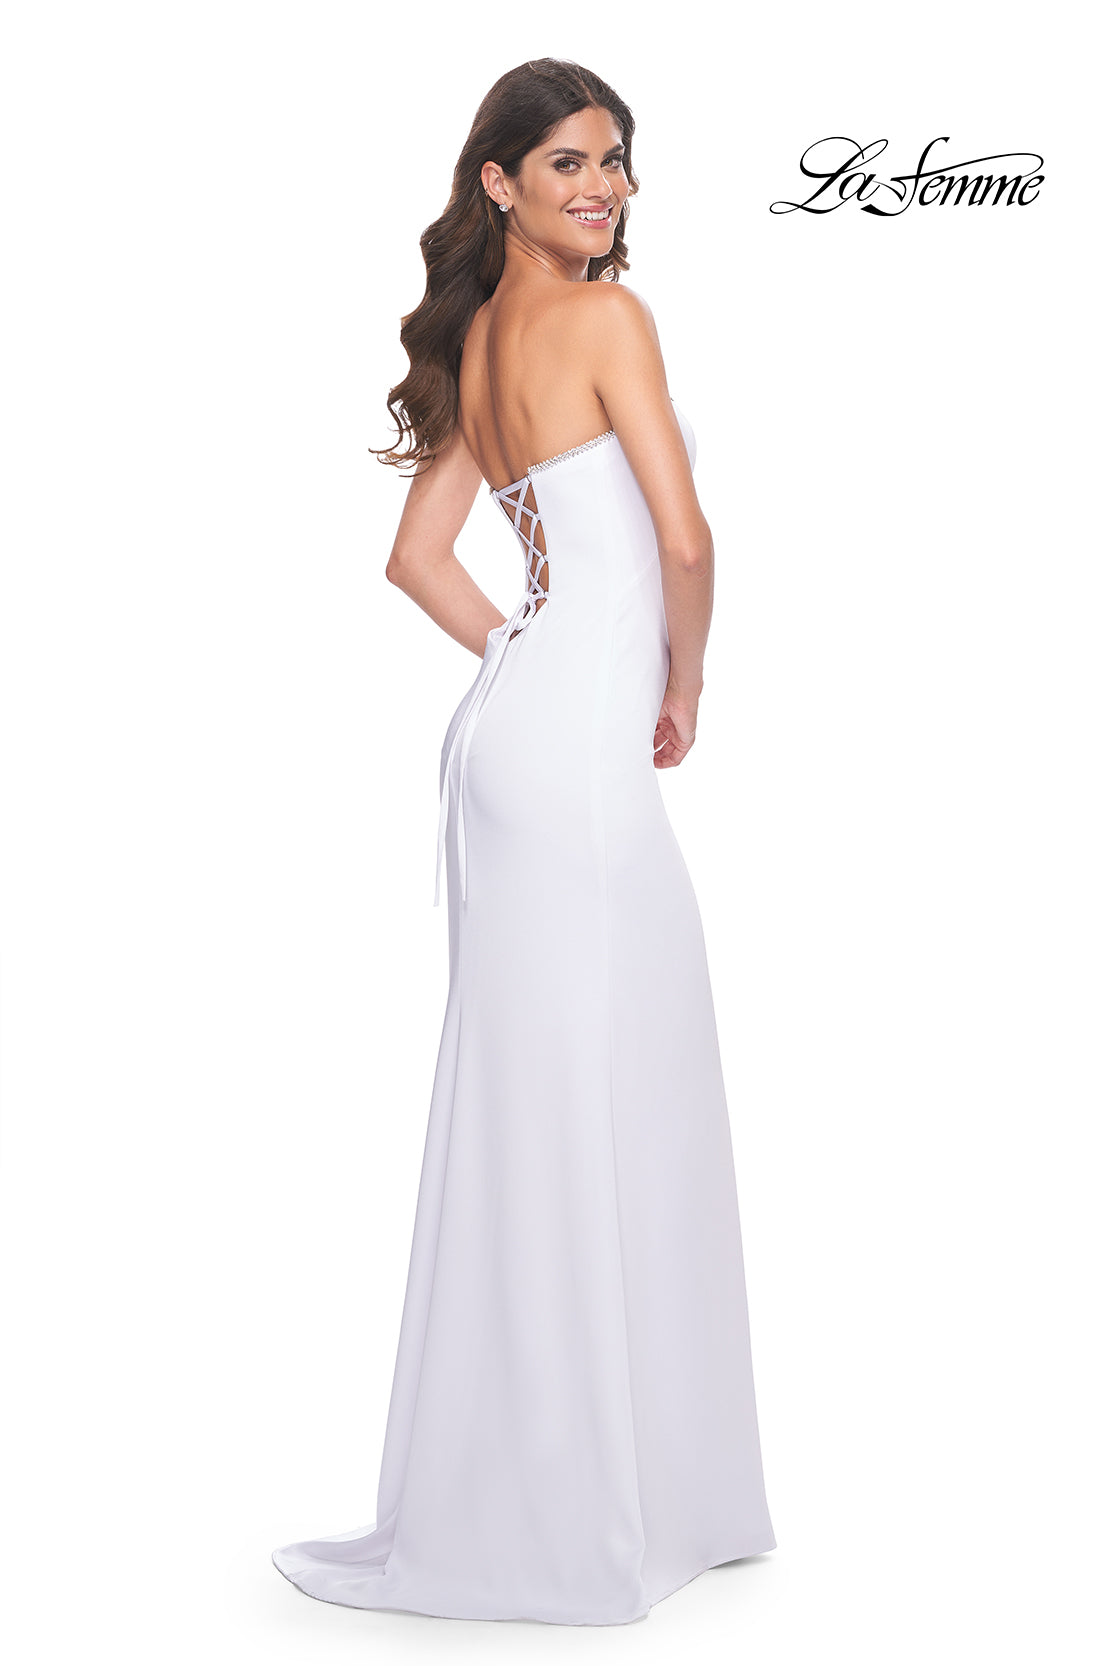 La-Femme-31977-Sweetheart-Neckline-Lace-up-Back-High-Slit-Jersey-Column-Fitted-White-Evening-Dress-B-Chic-Fashions-Prom-Dress